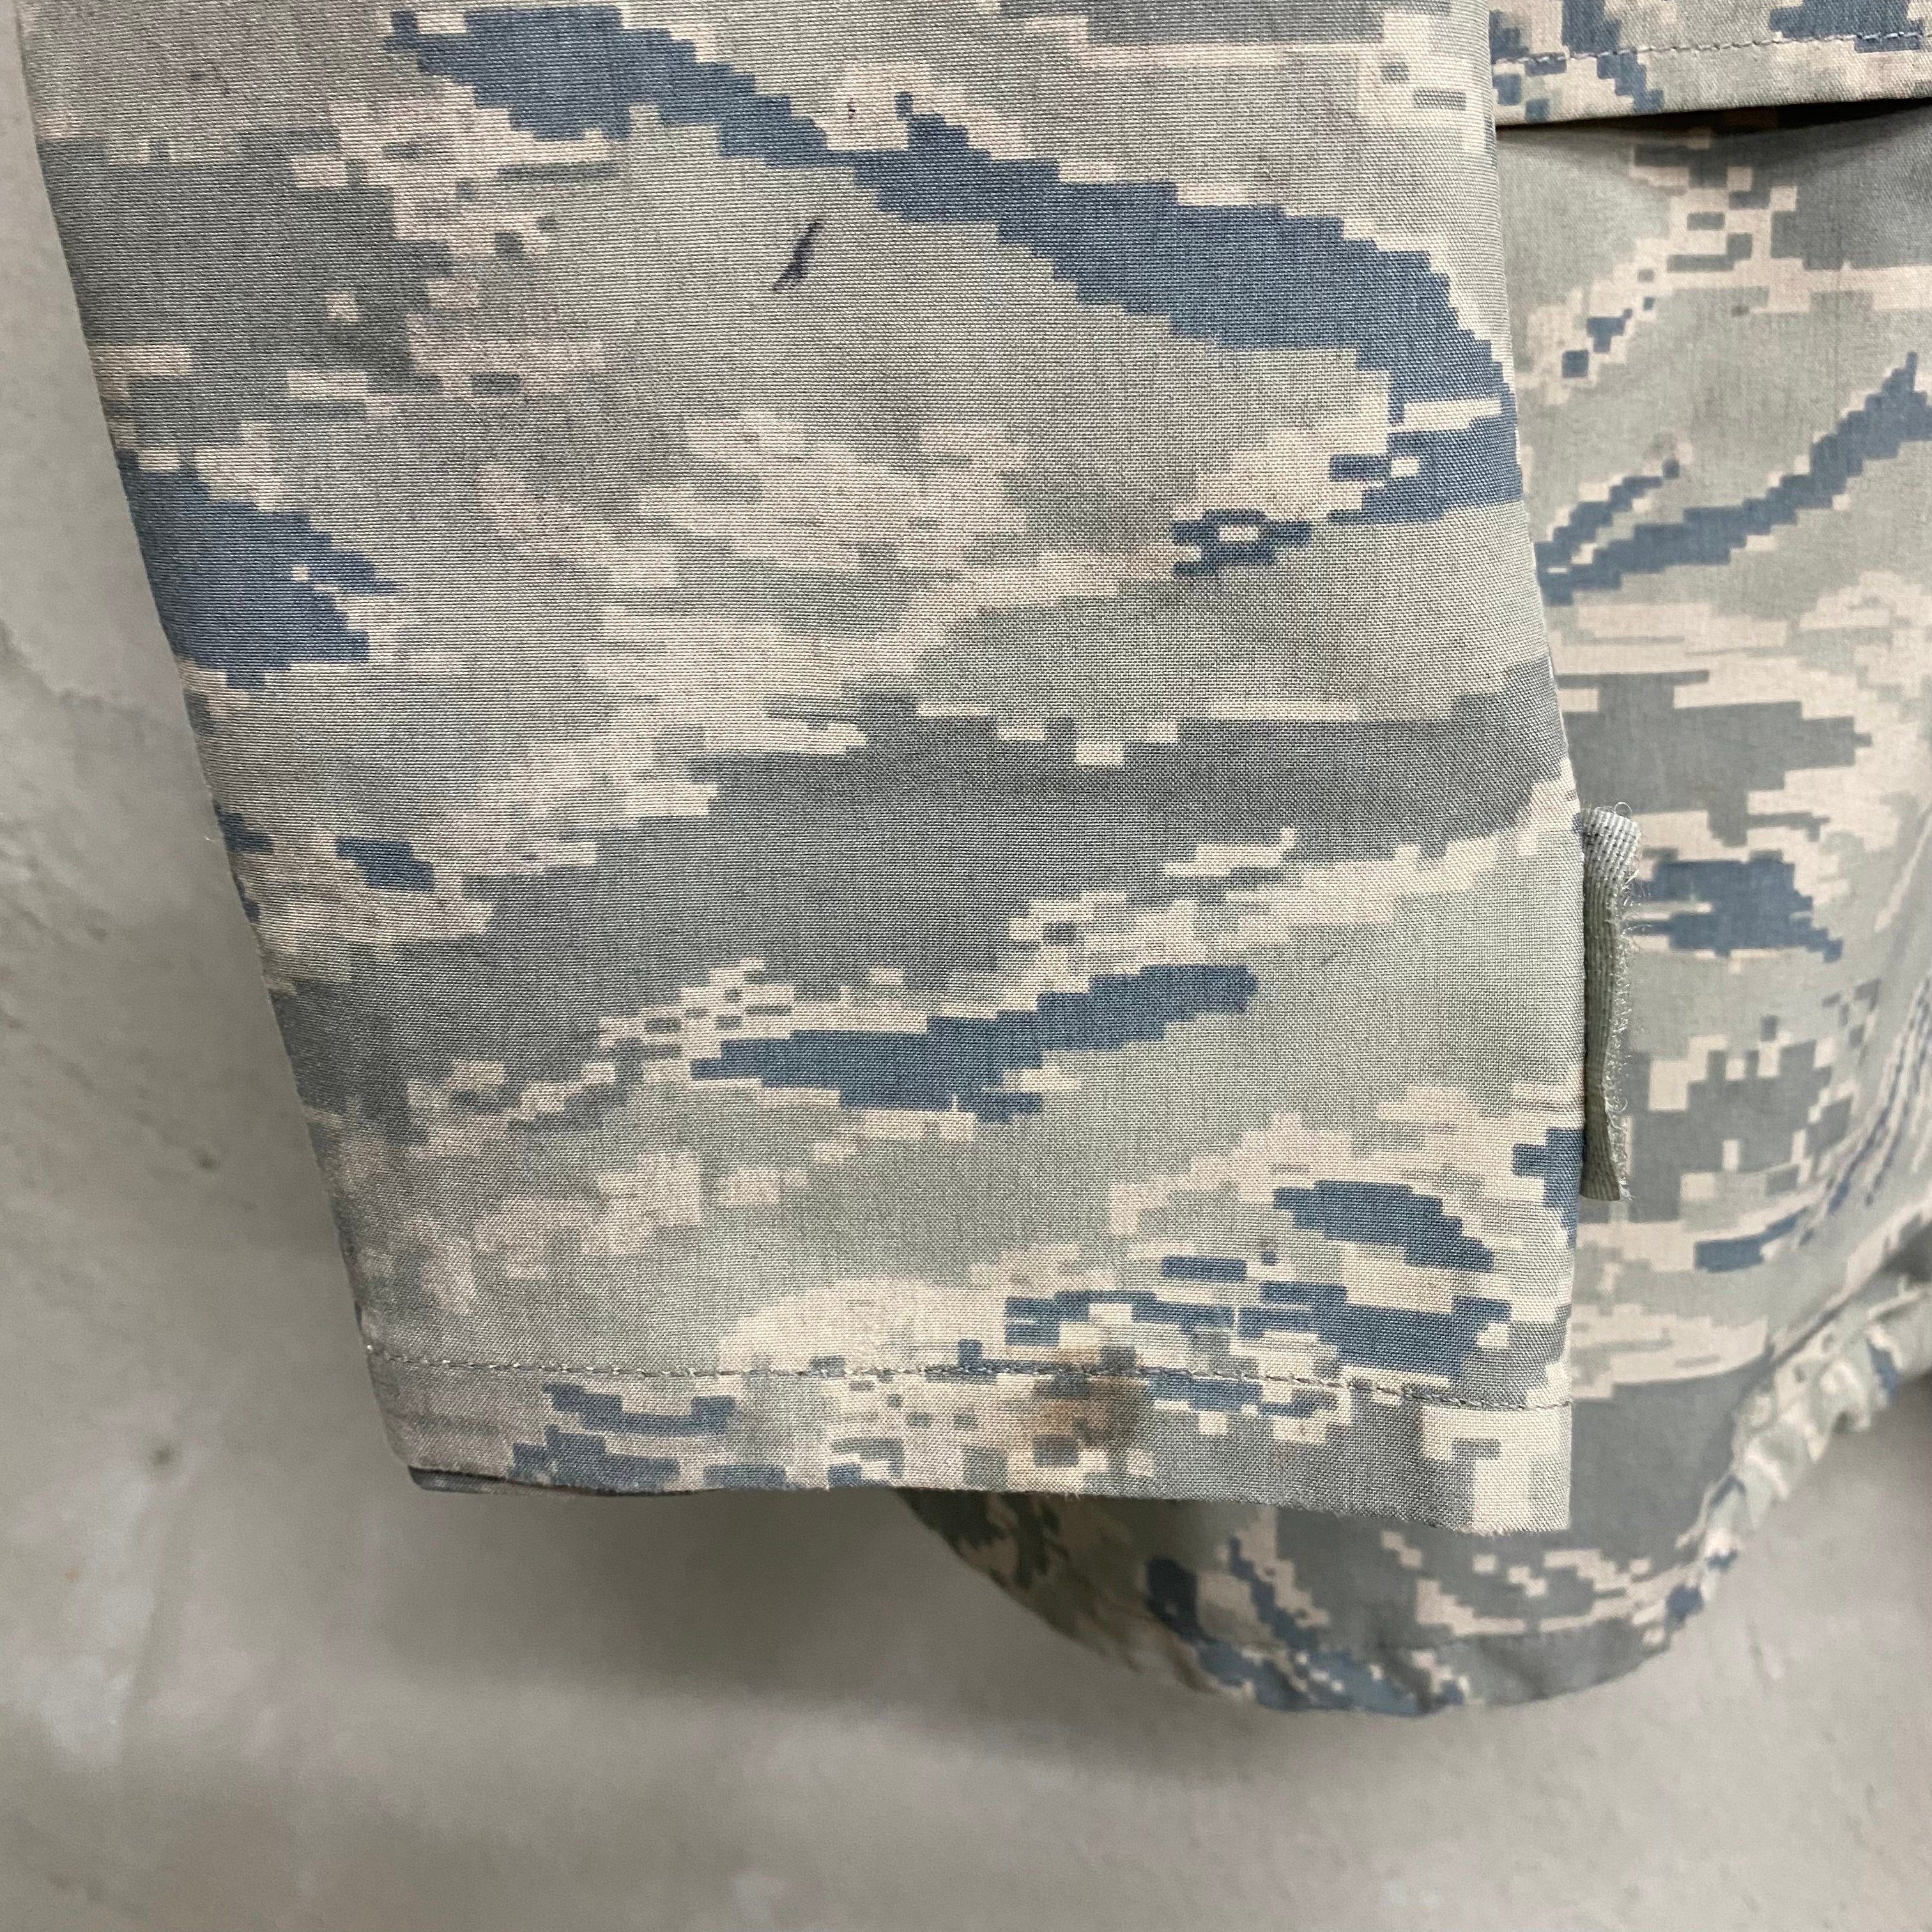 [ ONLY ONE ! ] US ACU GORE-TEX PARKA GEN.2  / US MILITARY